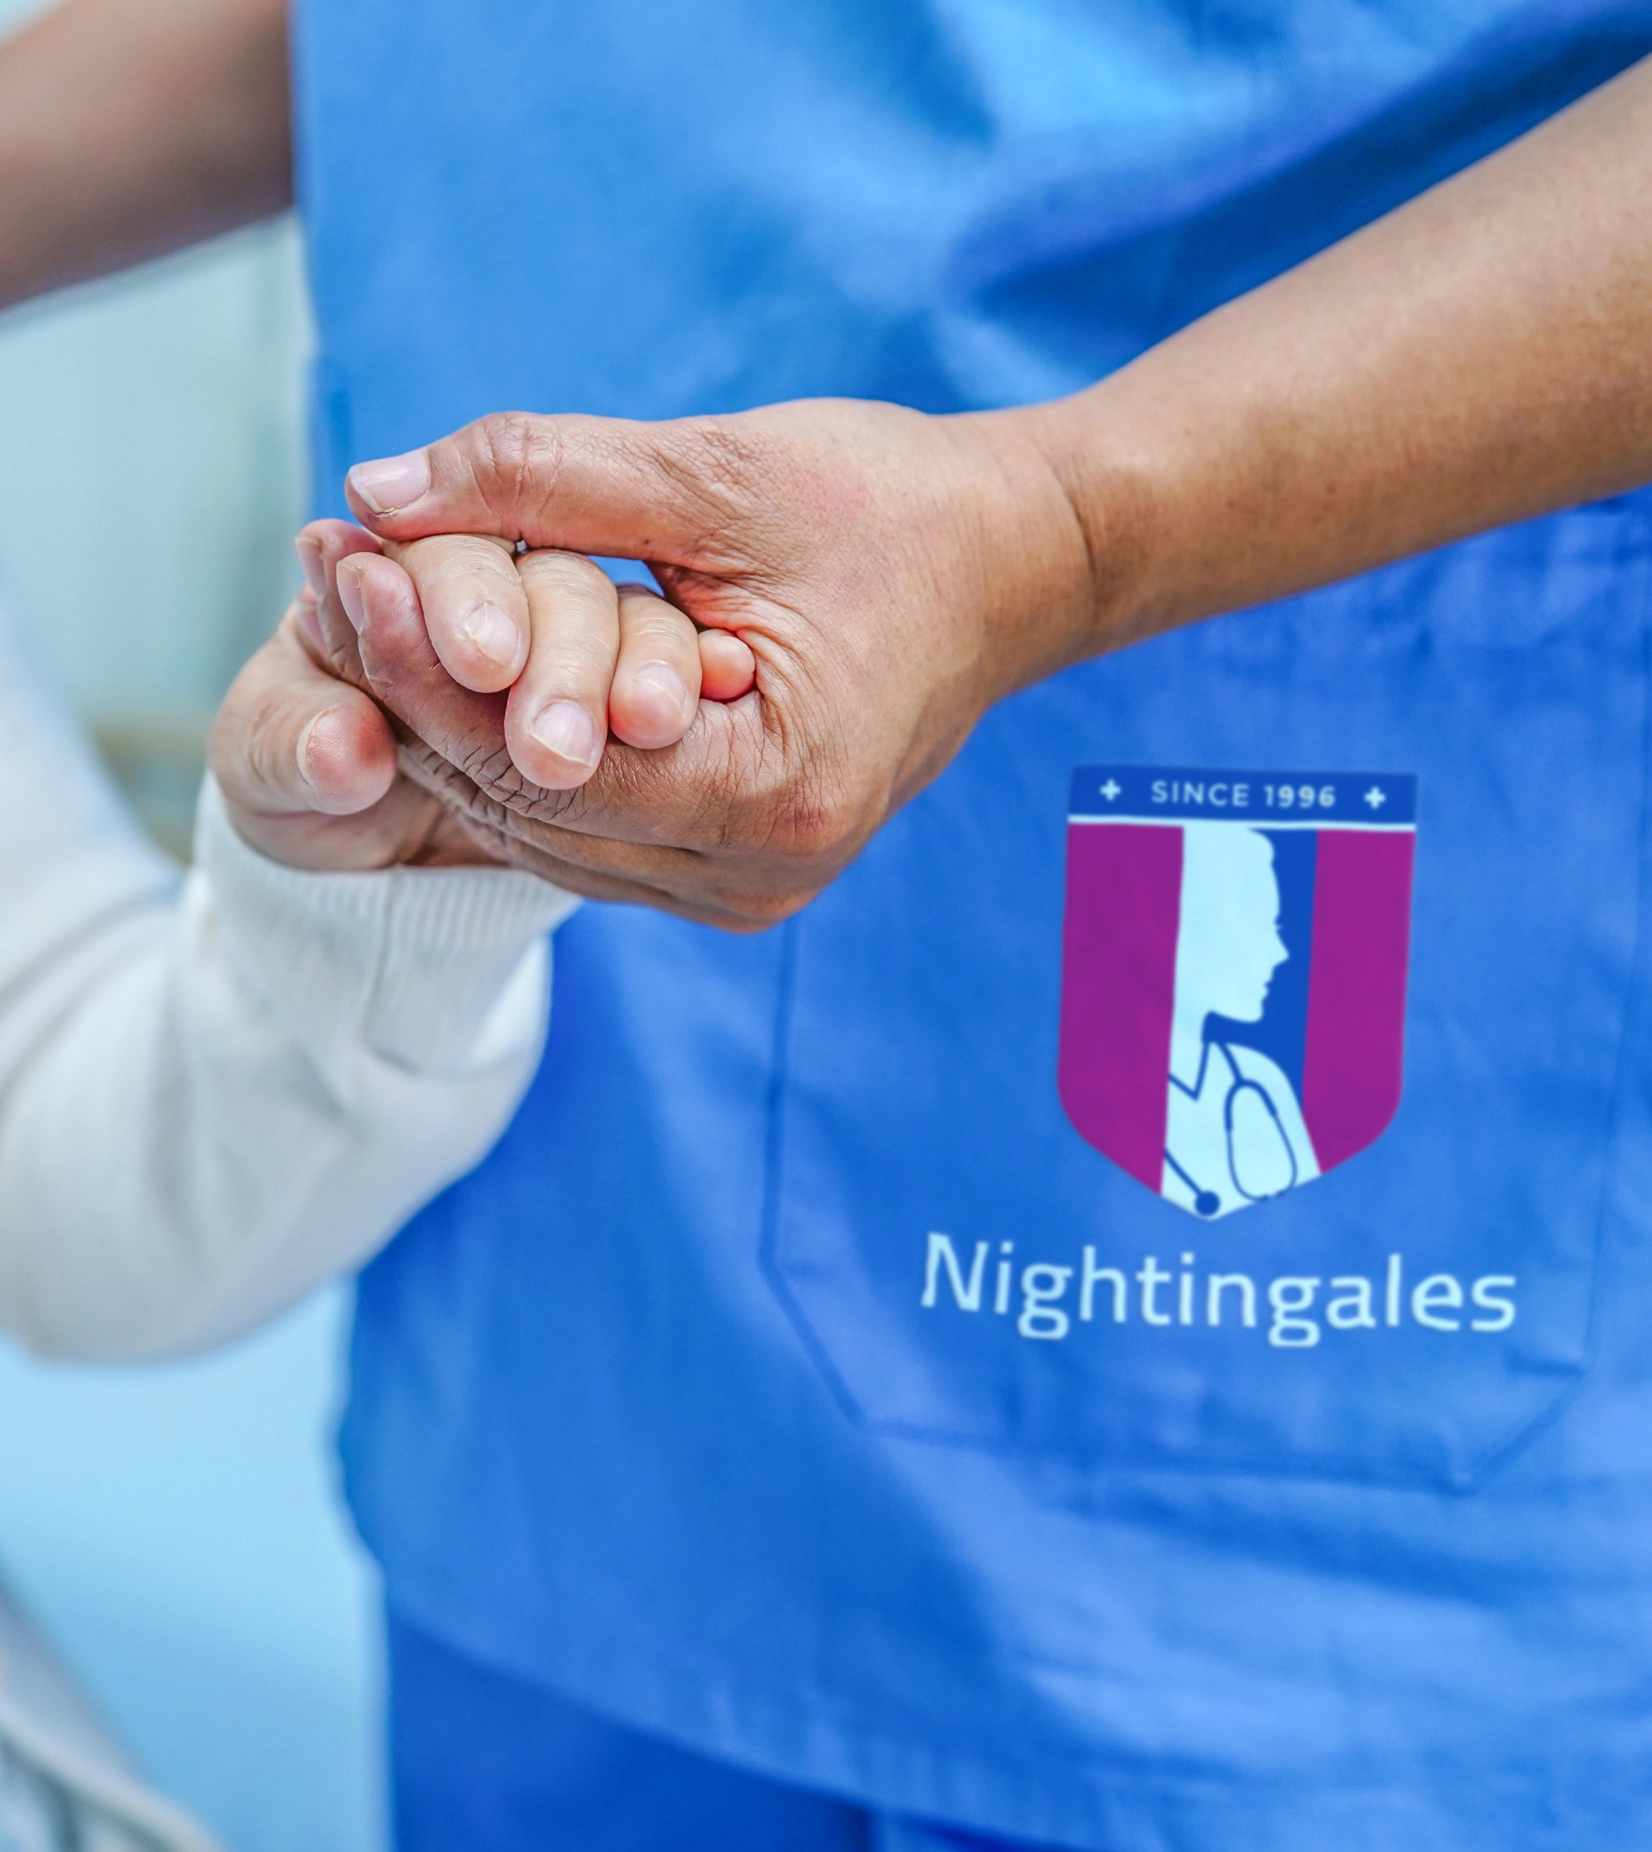 nightingales-home-health-services-hands